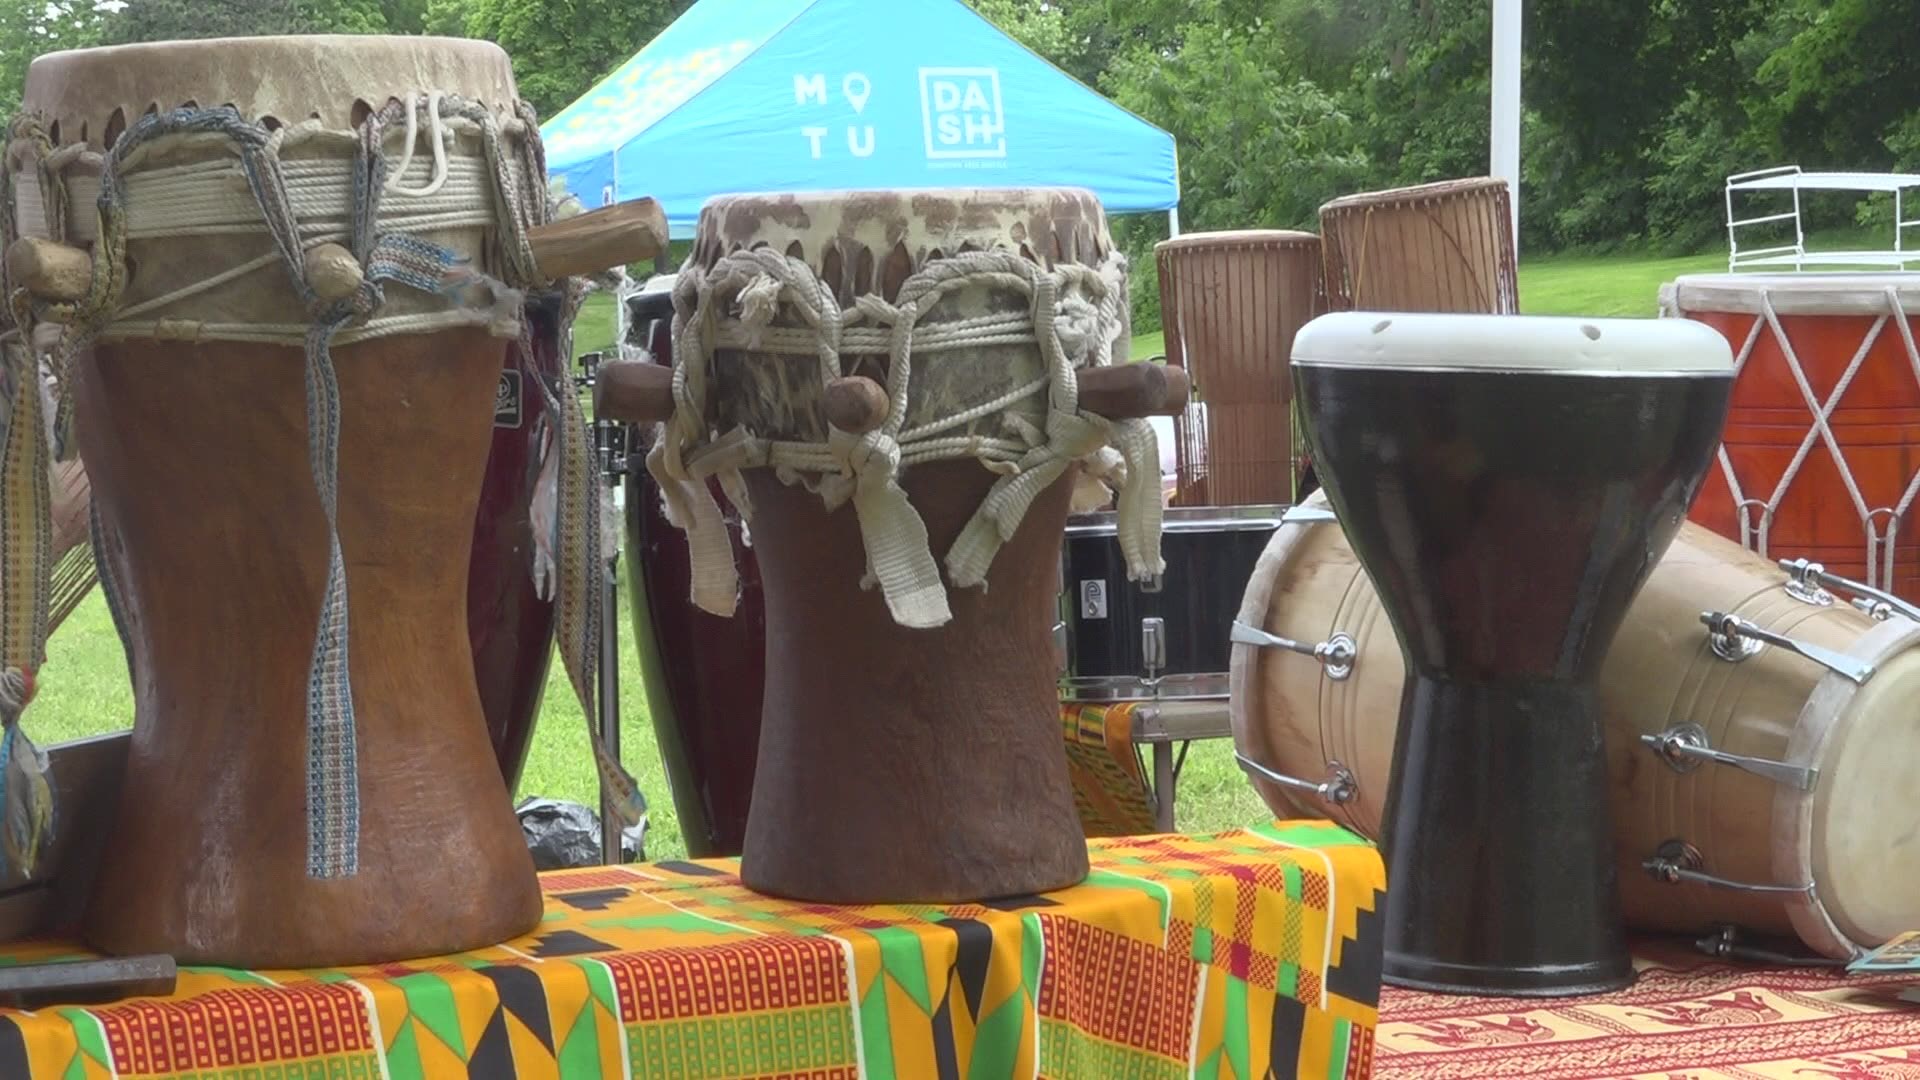 This is the first year that the annual Juneteenth celebration in Grand Rapids is a city-sponsored event.